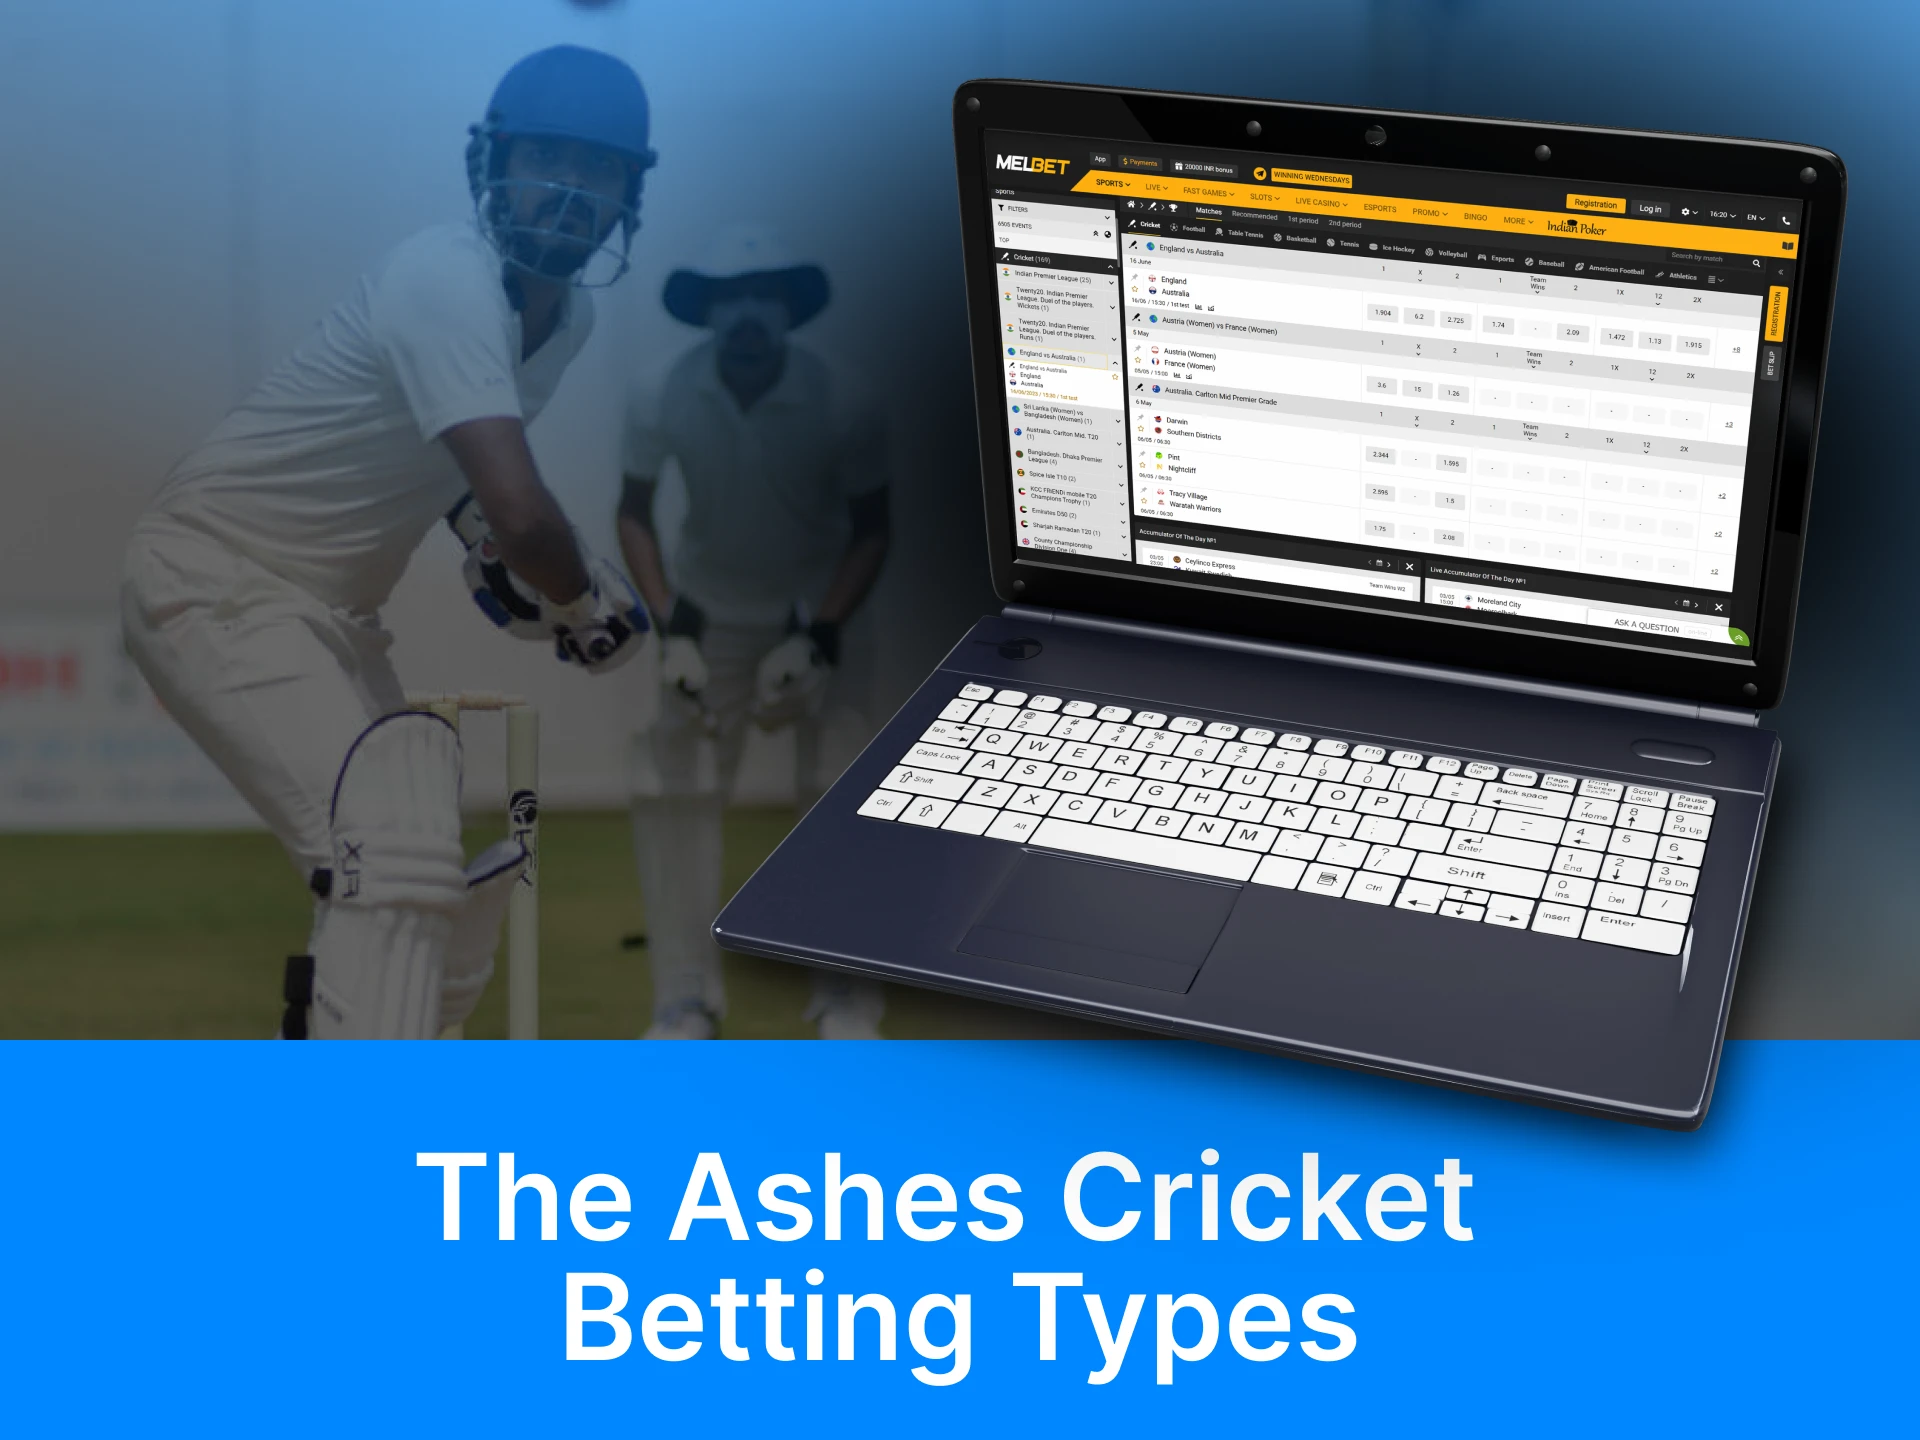 Betting on The Ashes Series can include different types of bets.